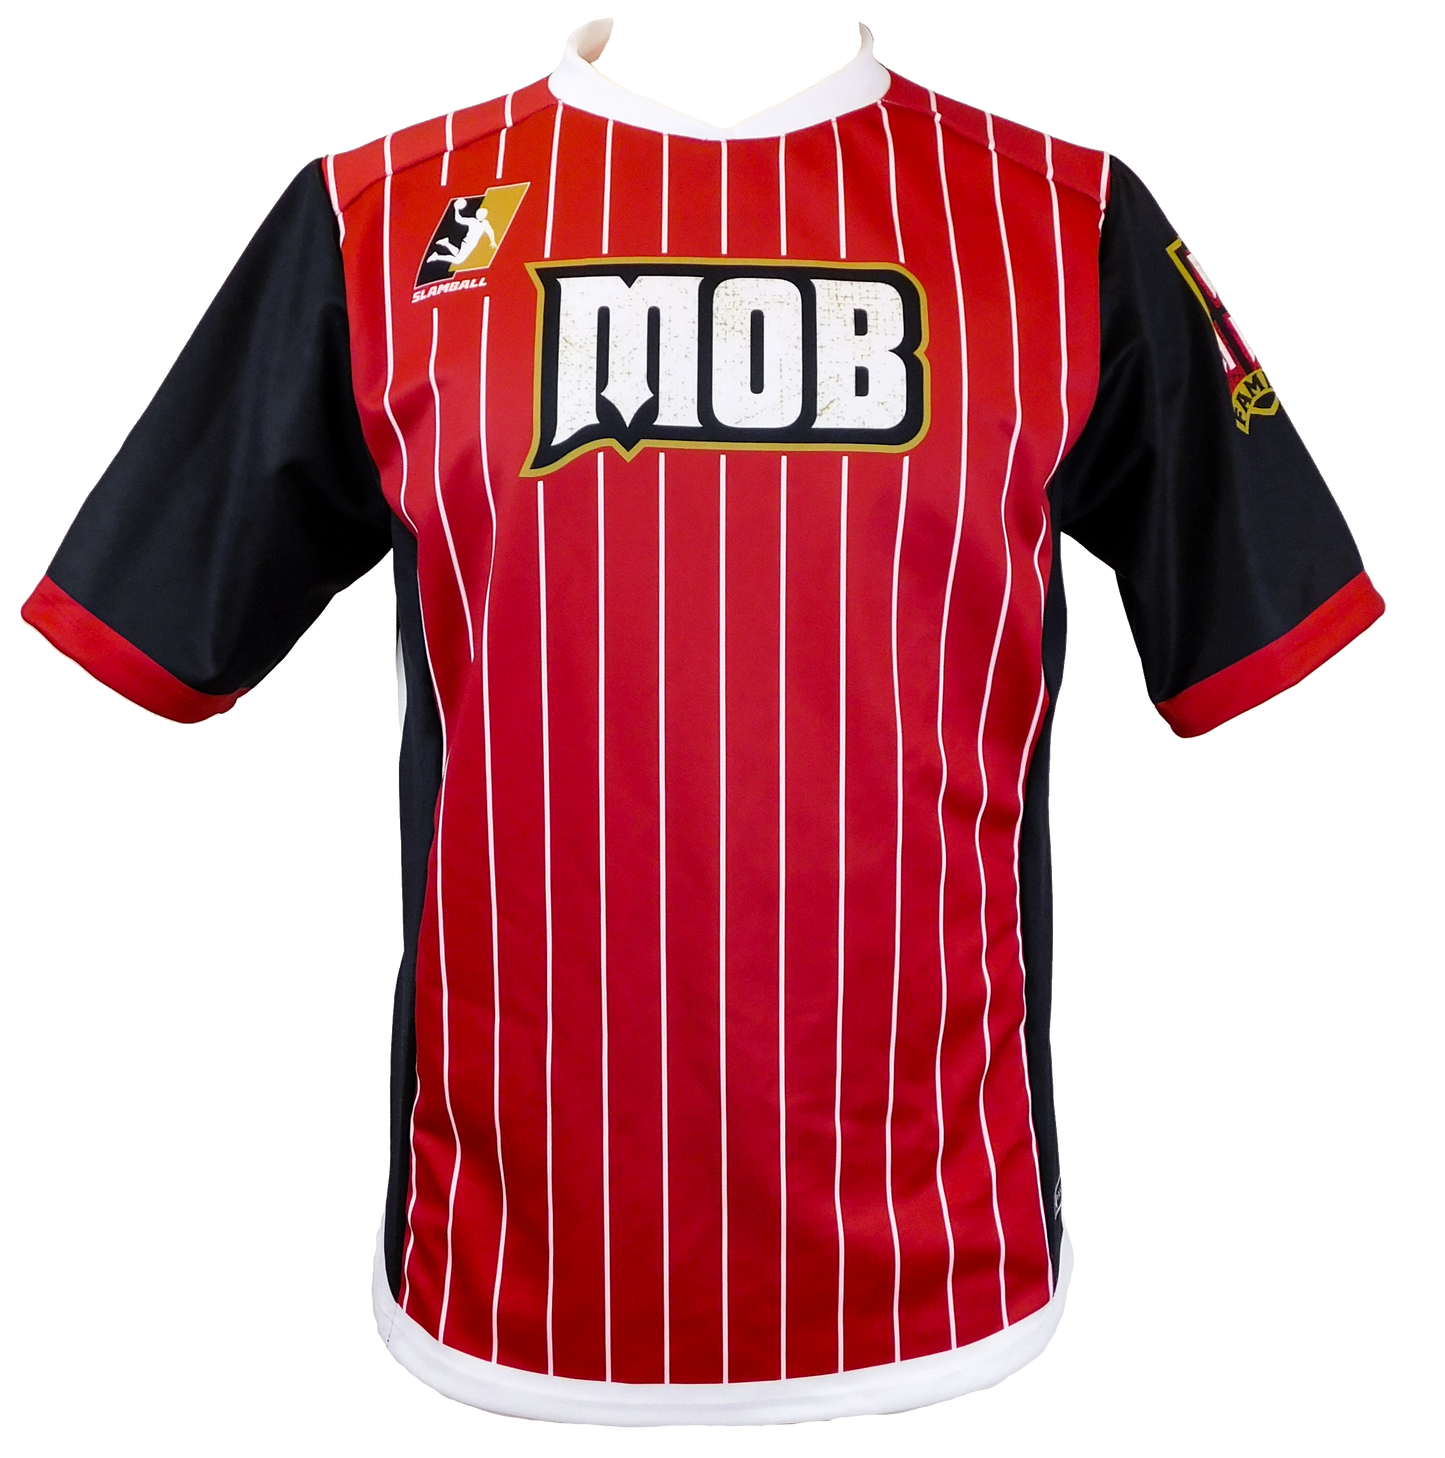 MOB - Team Jersey - Red/White